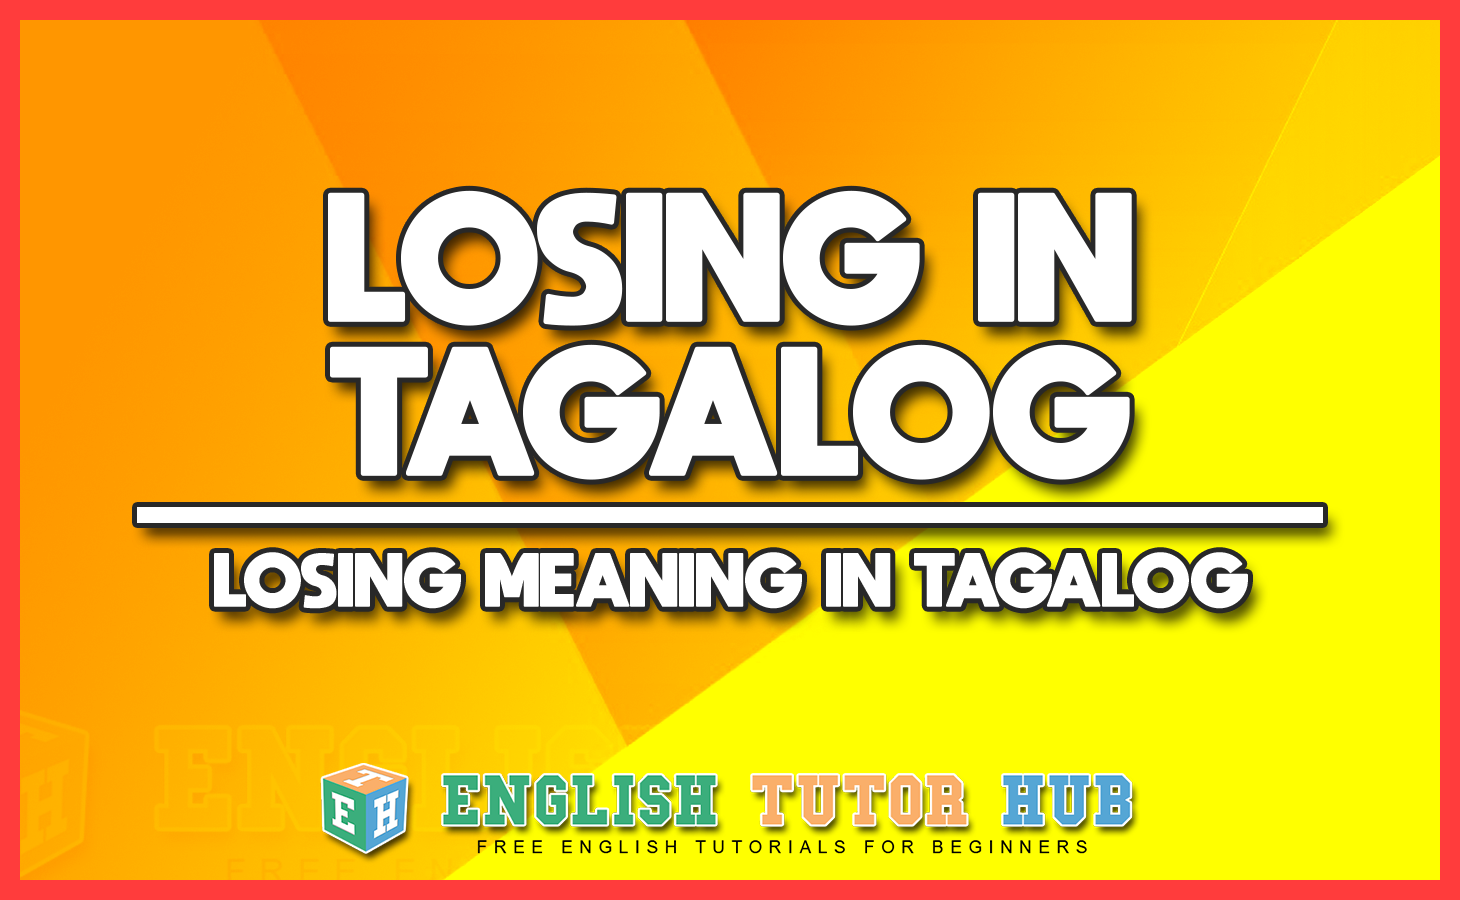 LOSING IN TAGALOG - LOSING MEANING IN TAGALOG